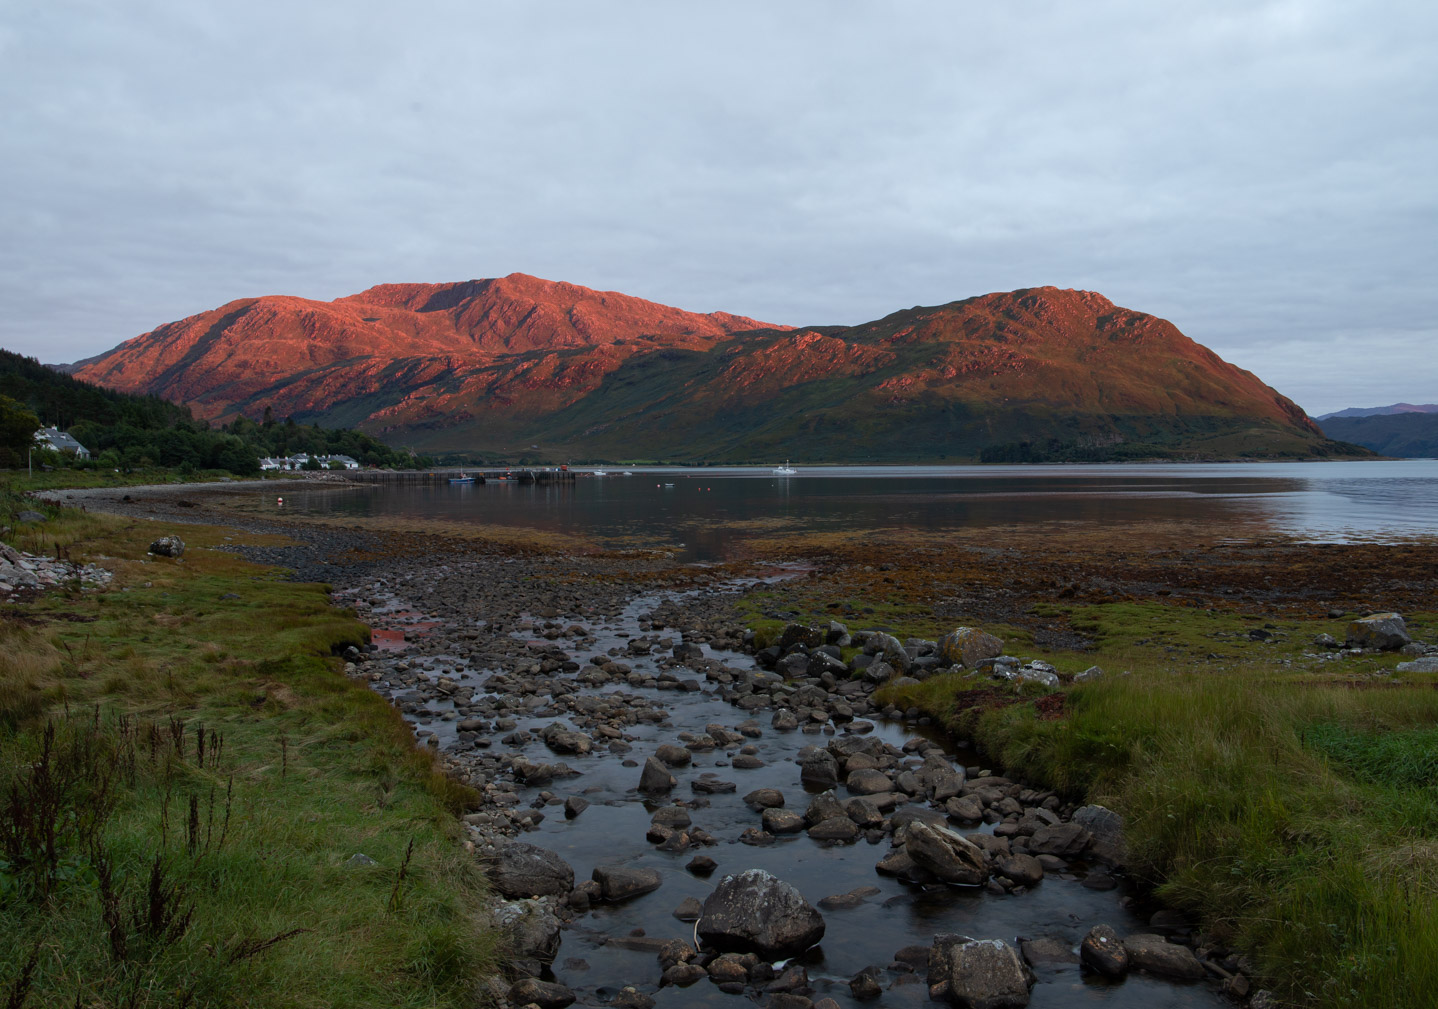 A sunset lit up the hills a stunning deep red for a few minutes when staying in Inverie, Knoydart, in September 2021 for some hillwalking.